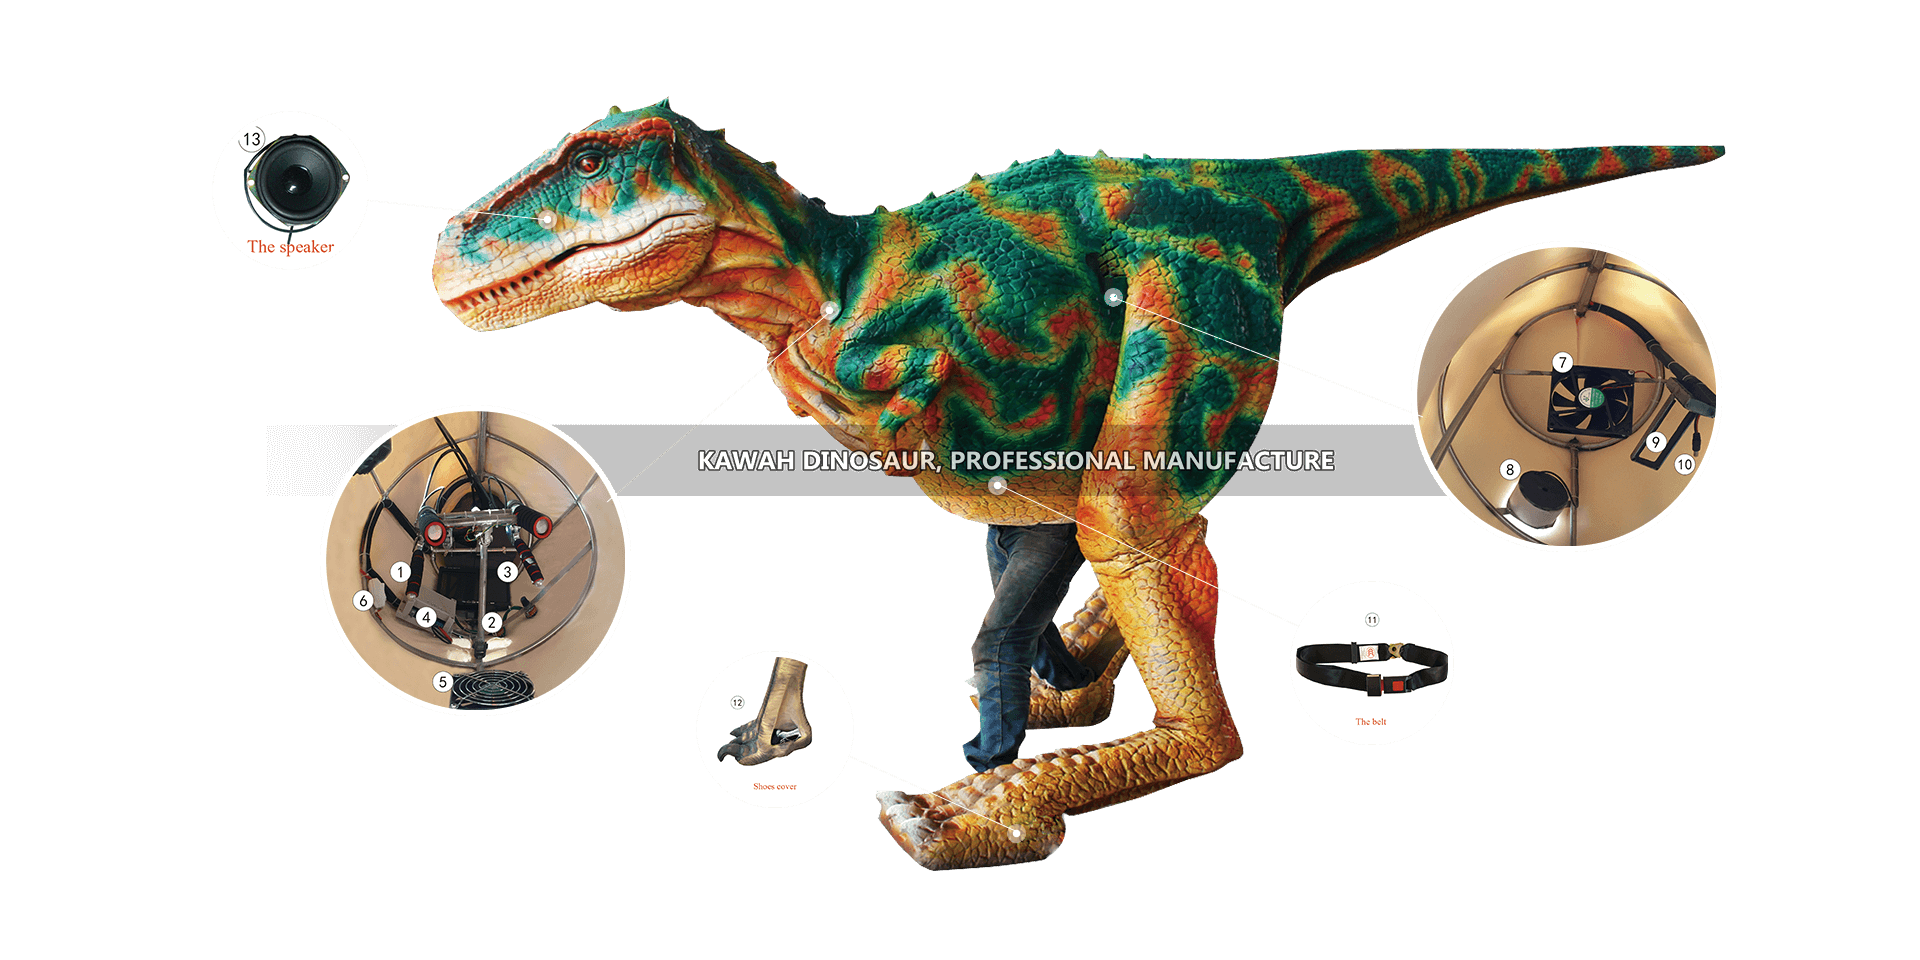 The whole process of making a dinosaur costume, parts and materials 